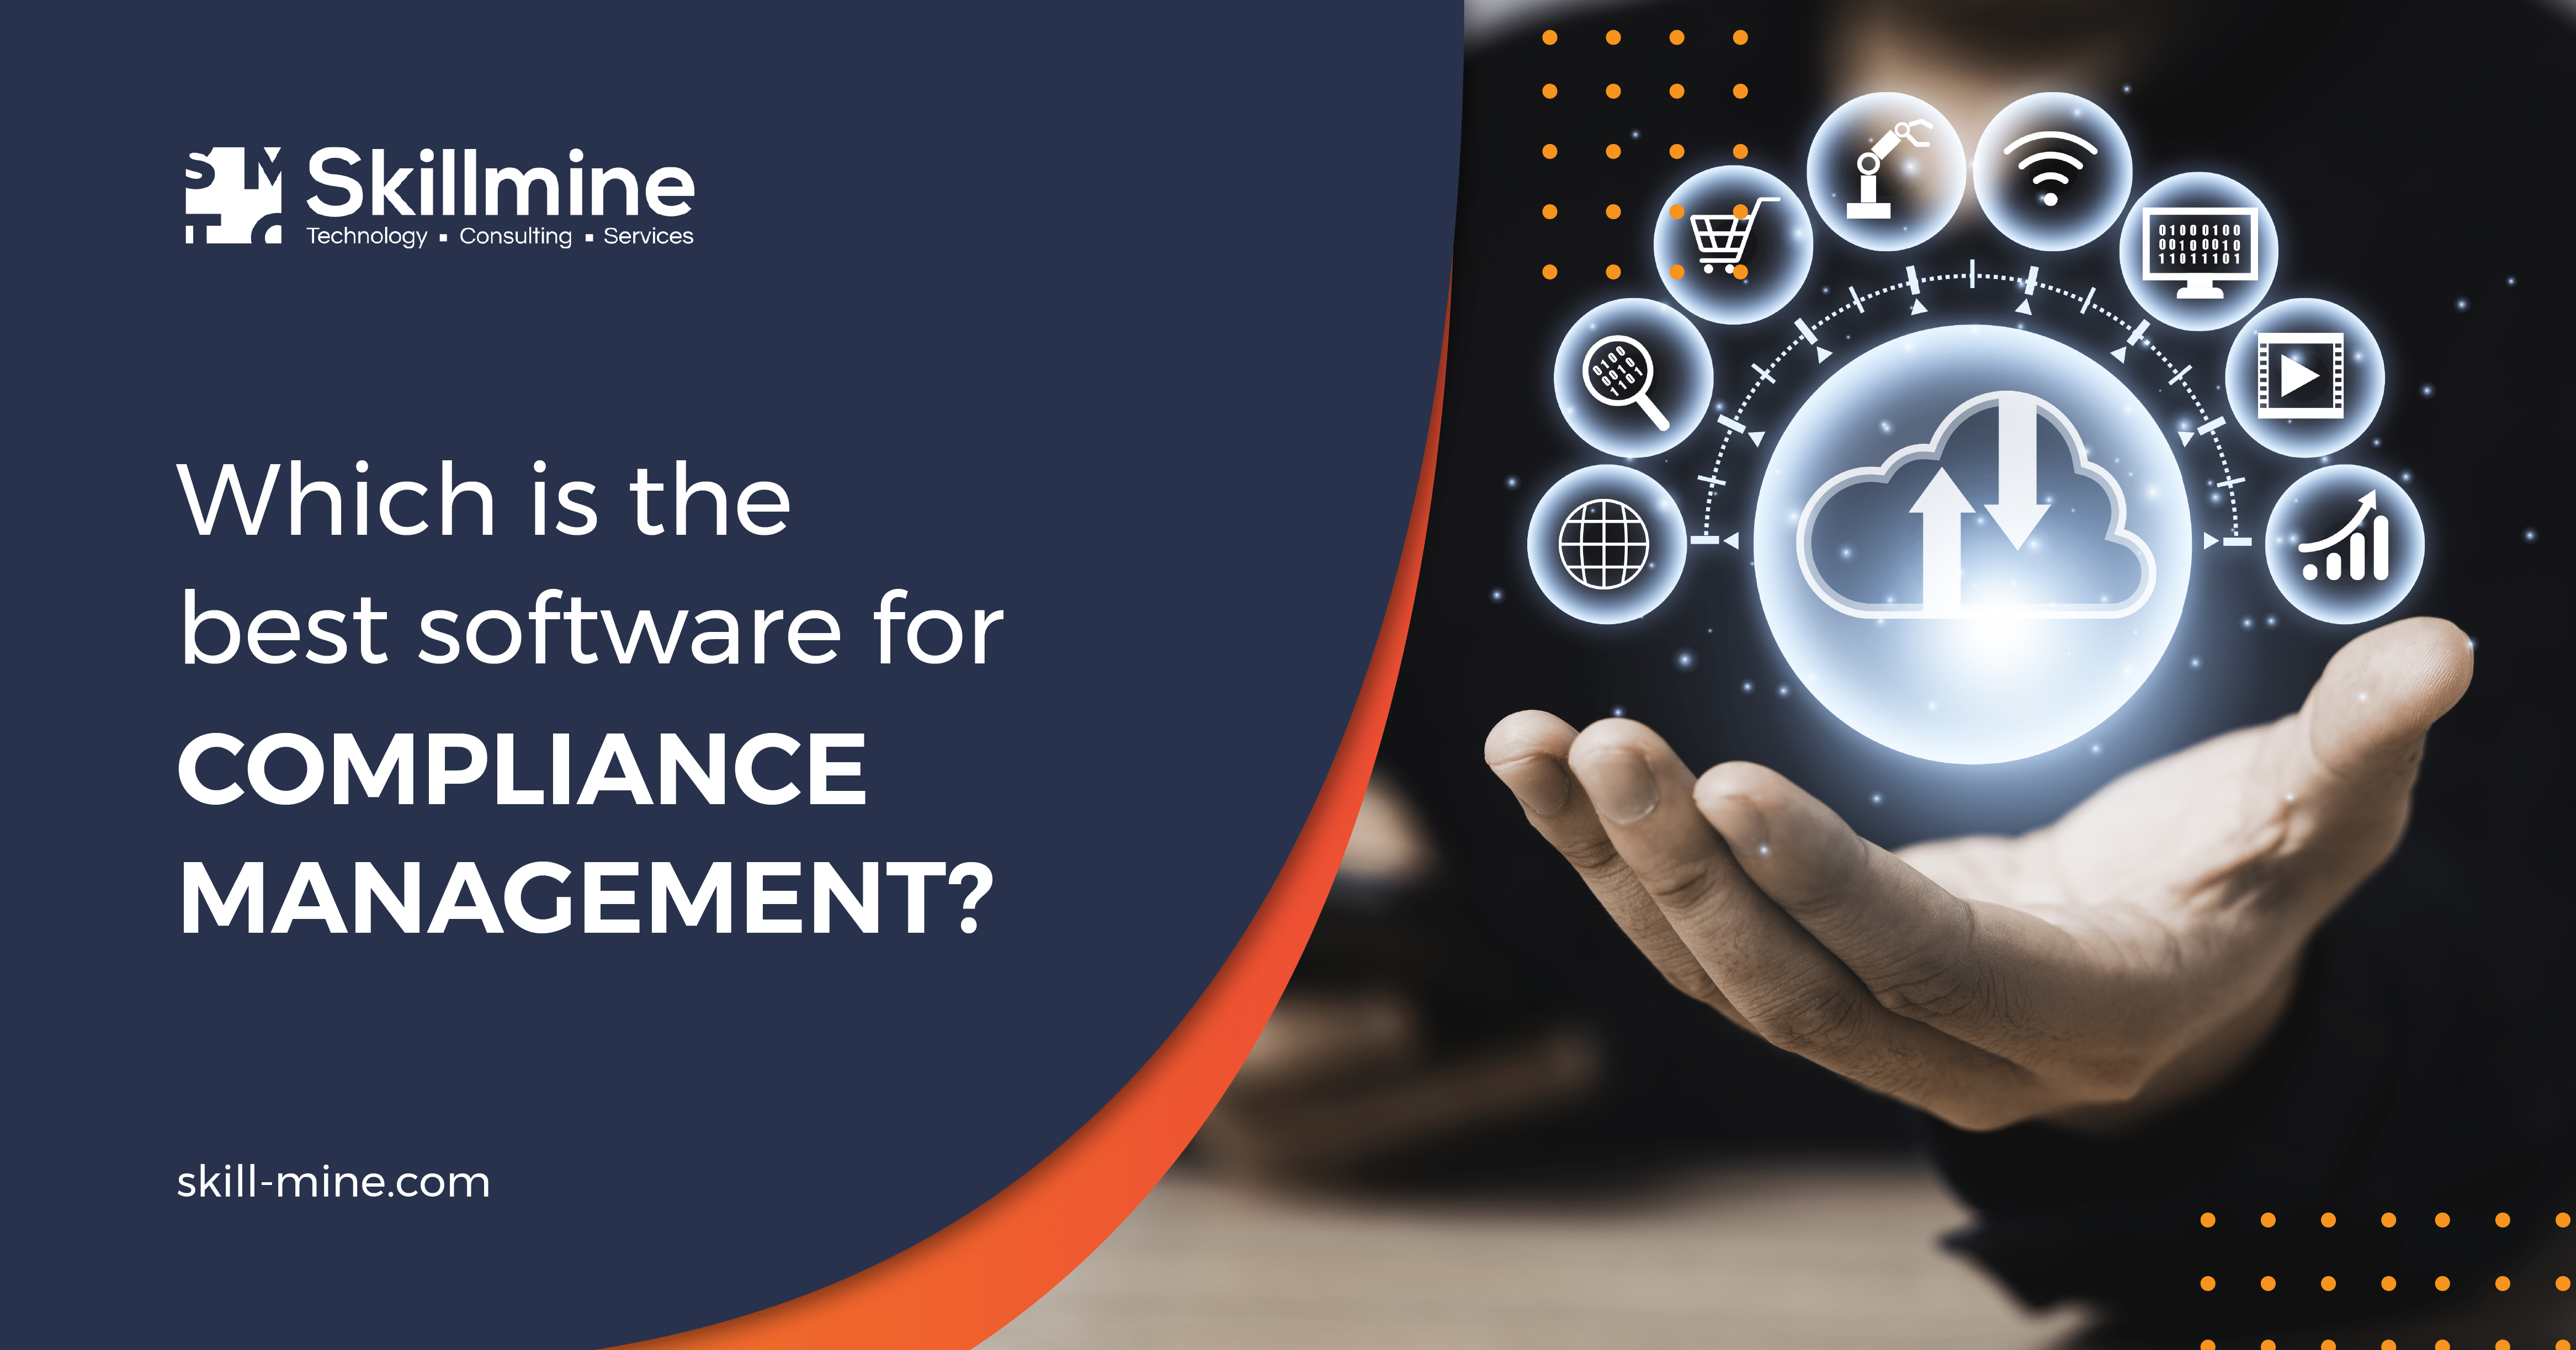 Which is the best software for Compliance Management